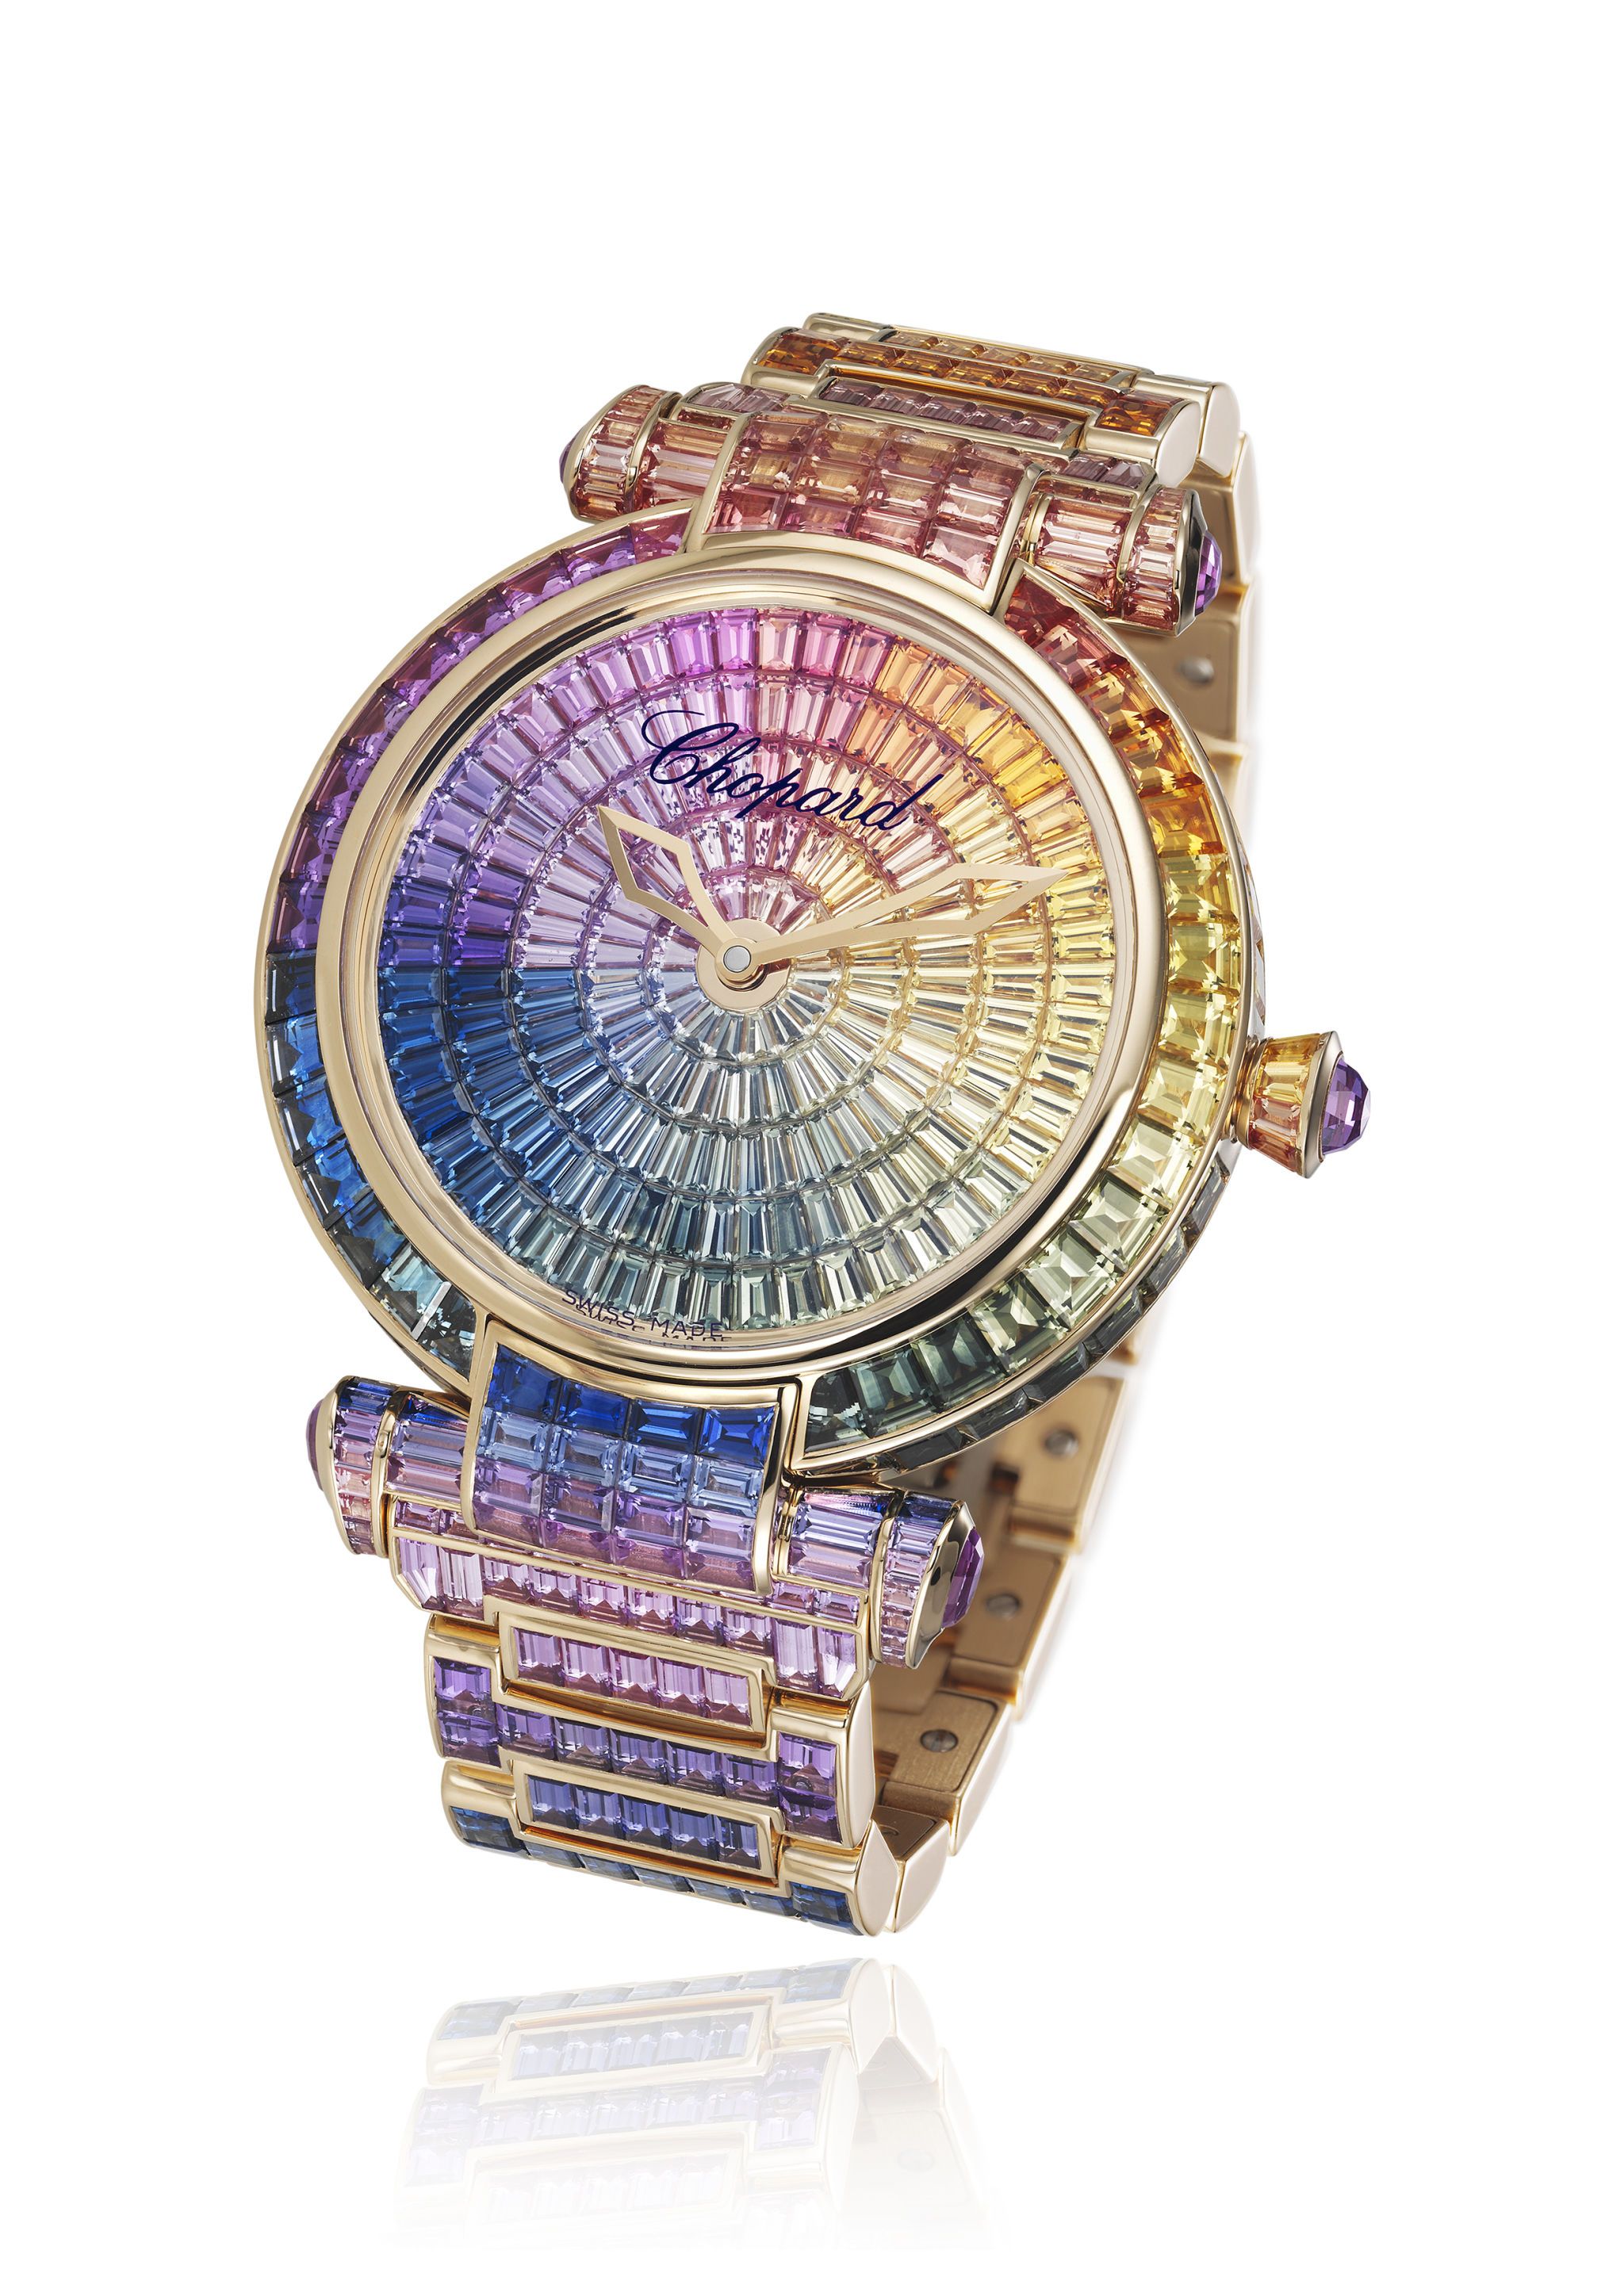 Rainbow Watches - Colorful Watches From 